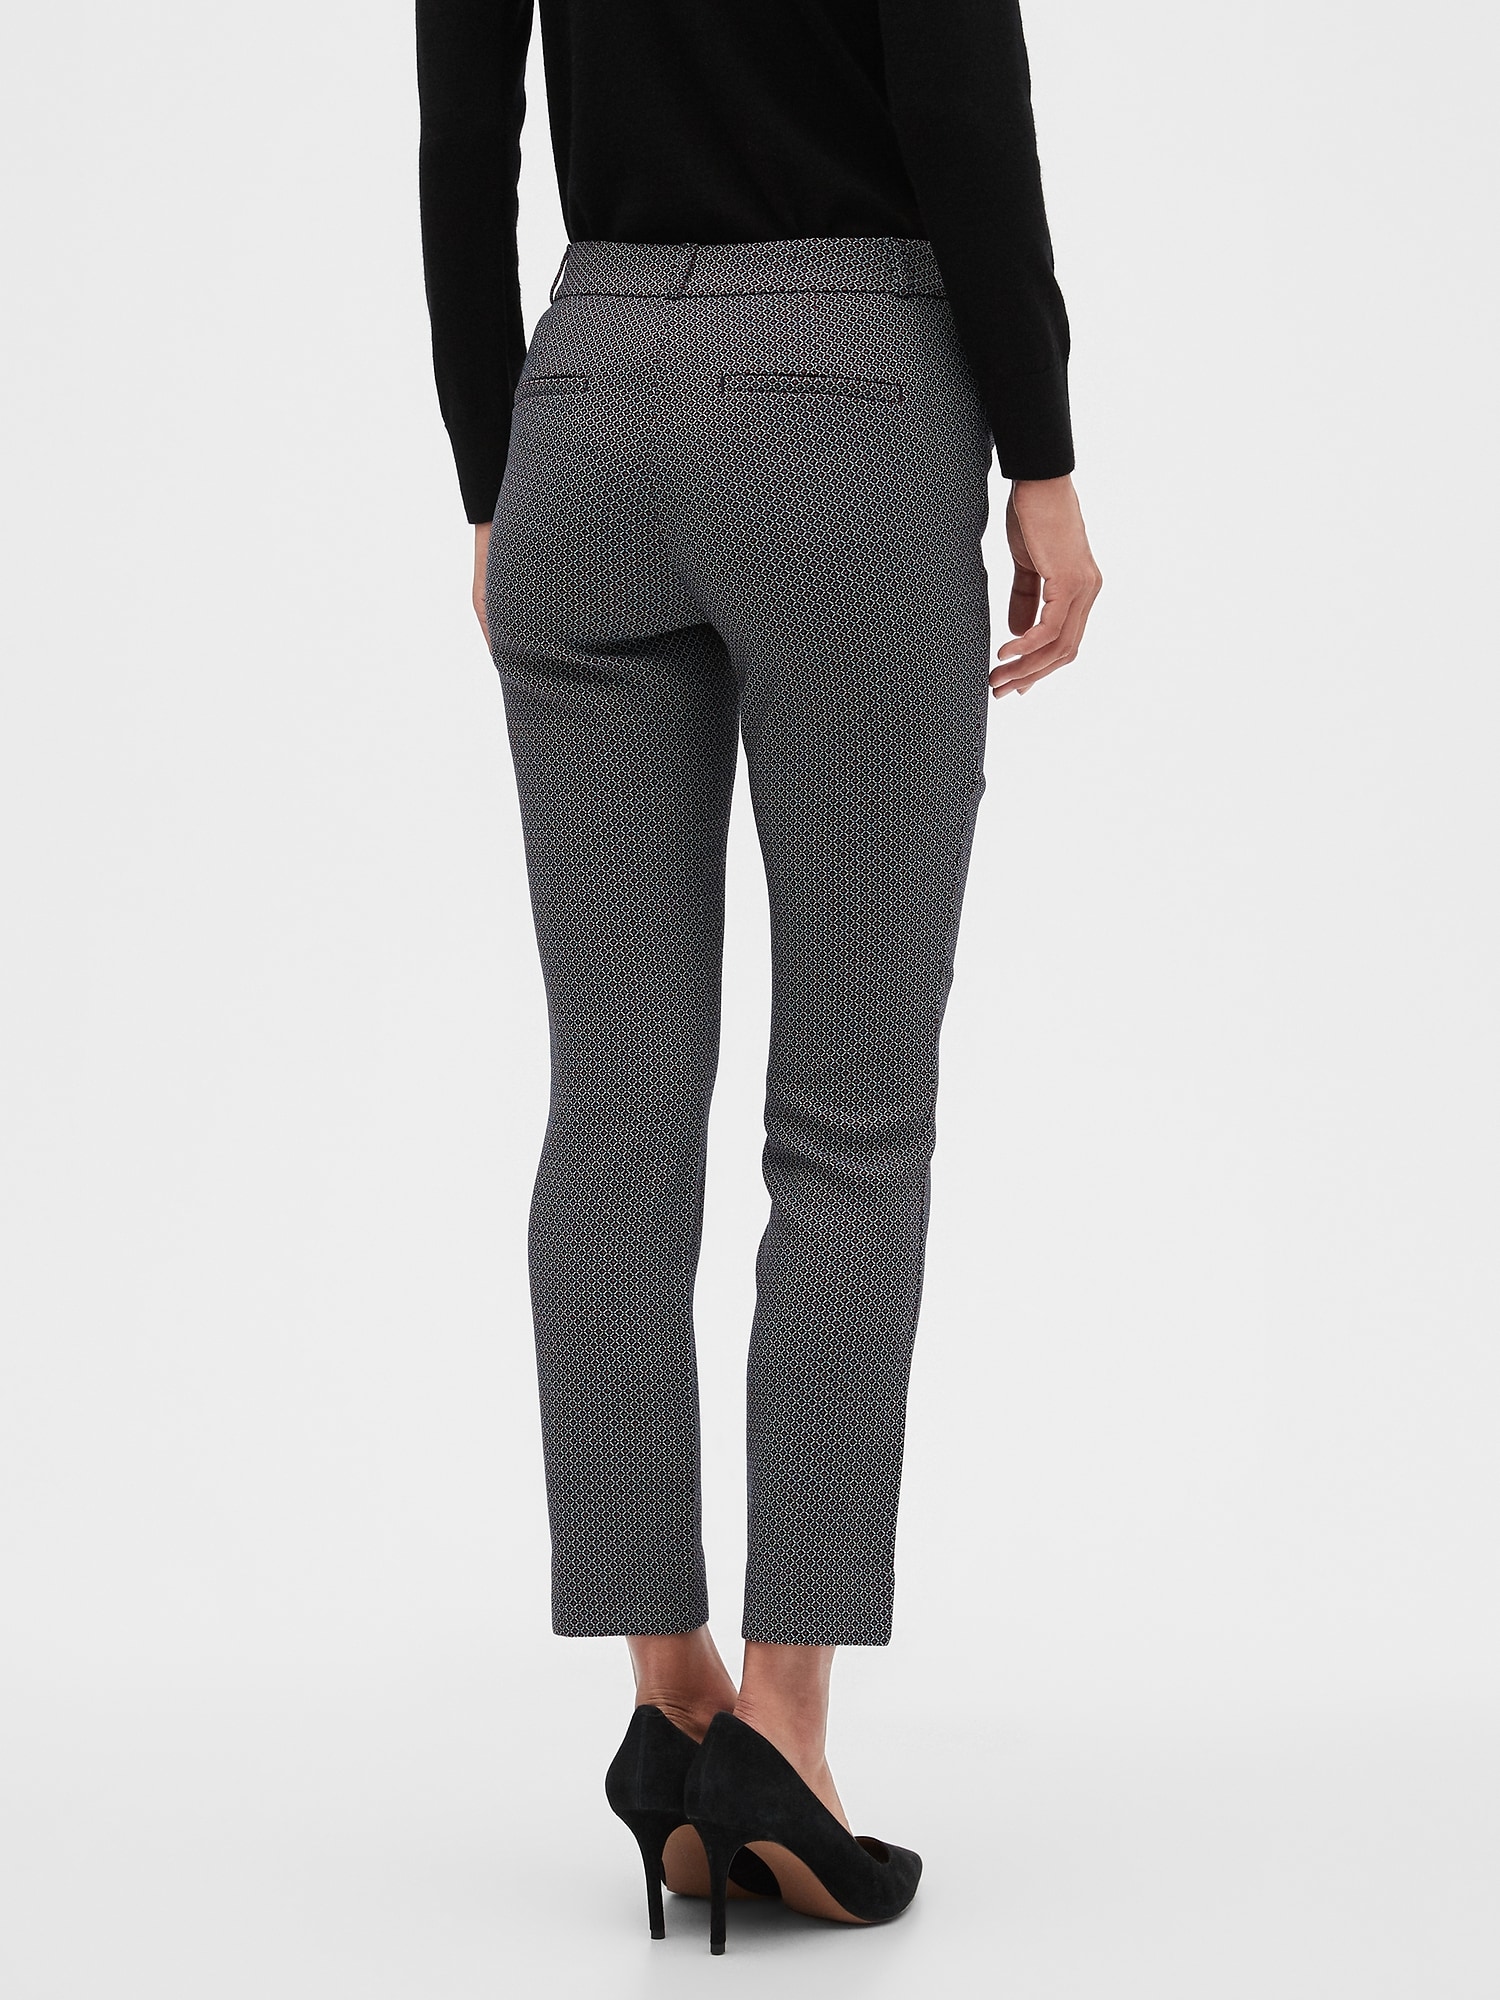 Sloan-Fit Houndstooth Slim Ankle Pant, Banana Republic